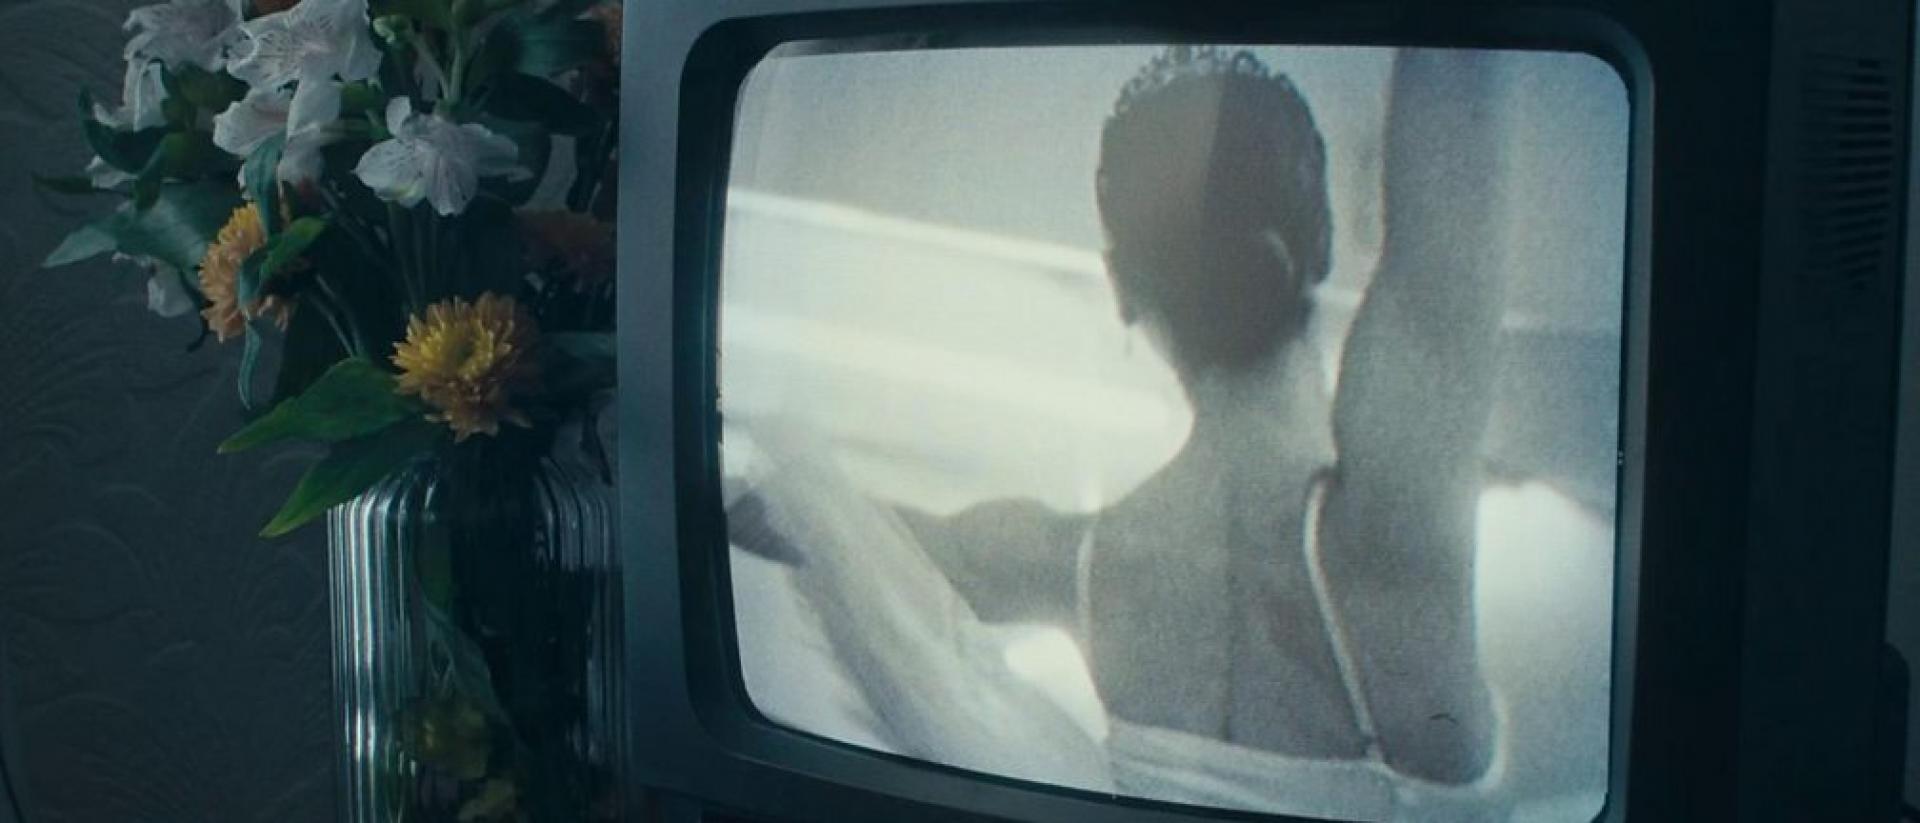 Still from Yew featuring a vase of flowers next to an old television showing a ballet dancer from behind.